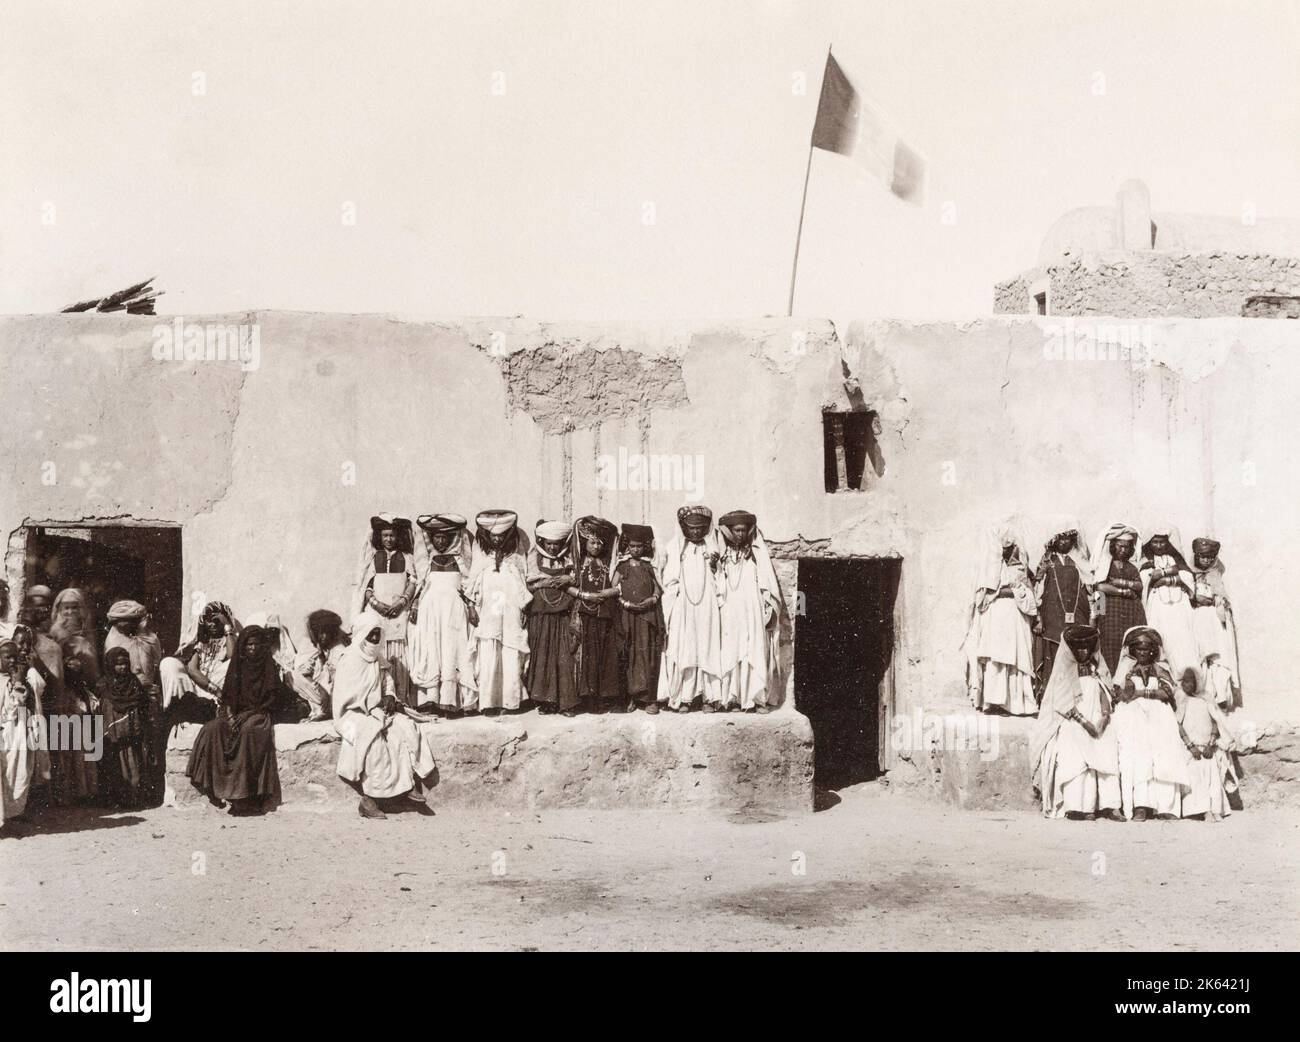 Group of women, Ouled Nail, Algeria, with French flag flying. Vintage 19th century photograph Stock Photo